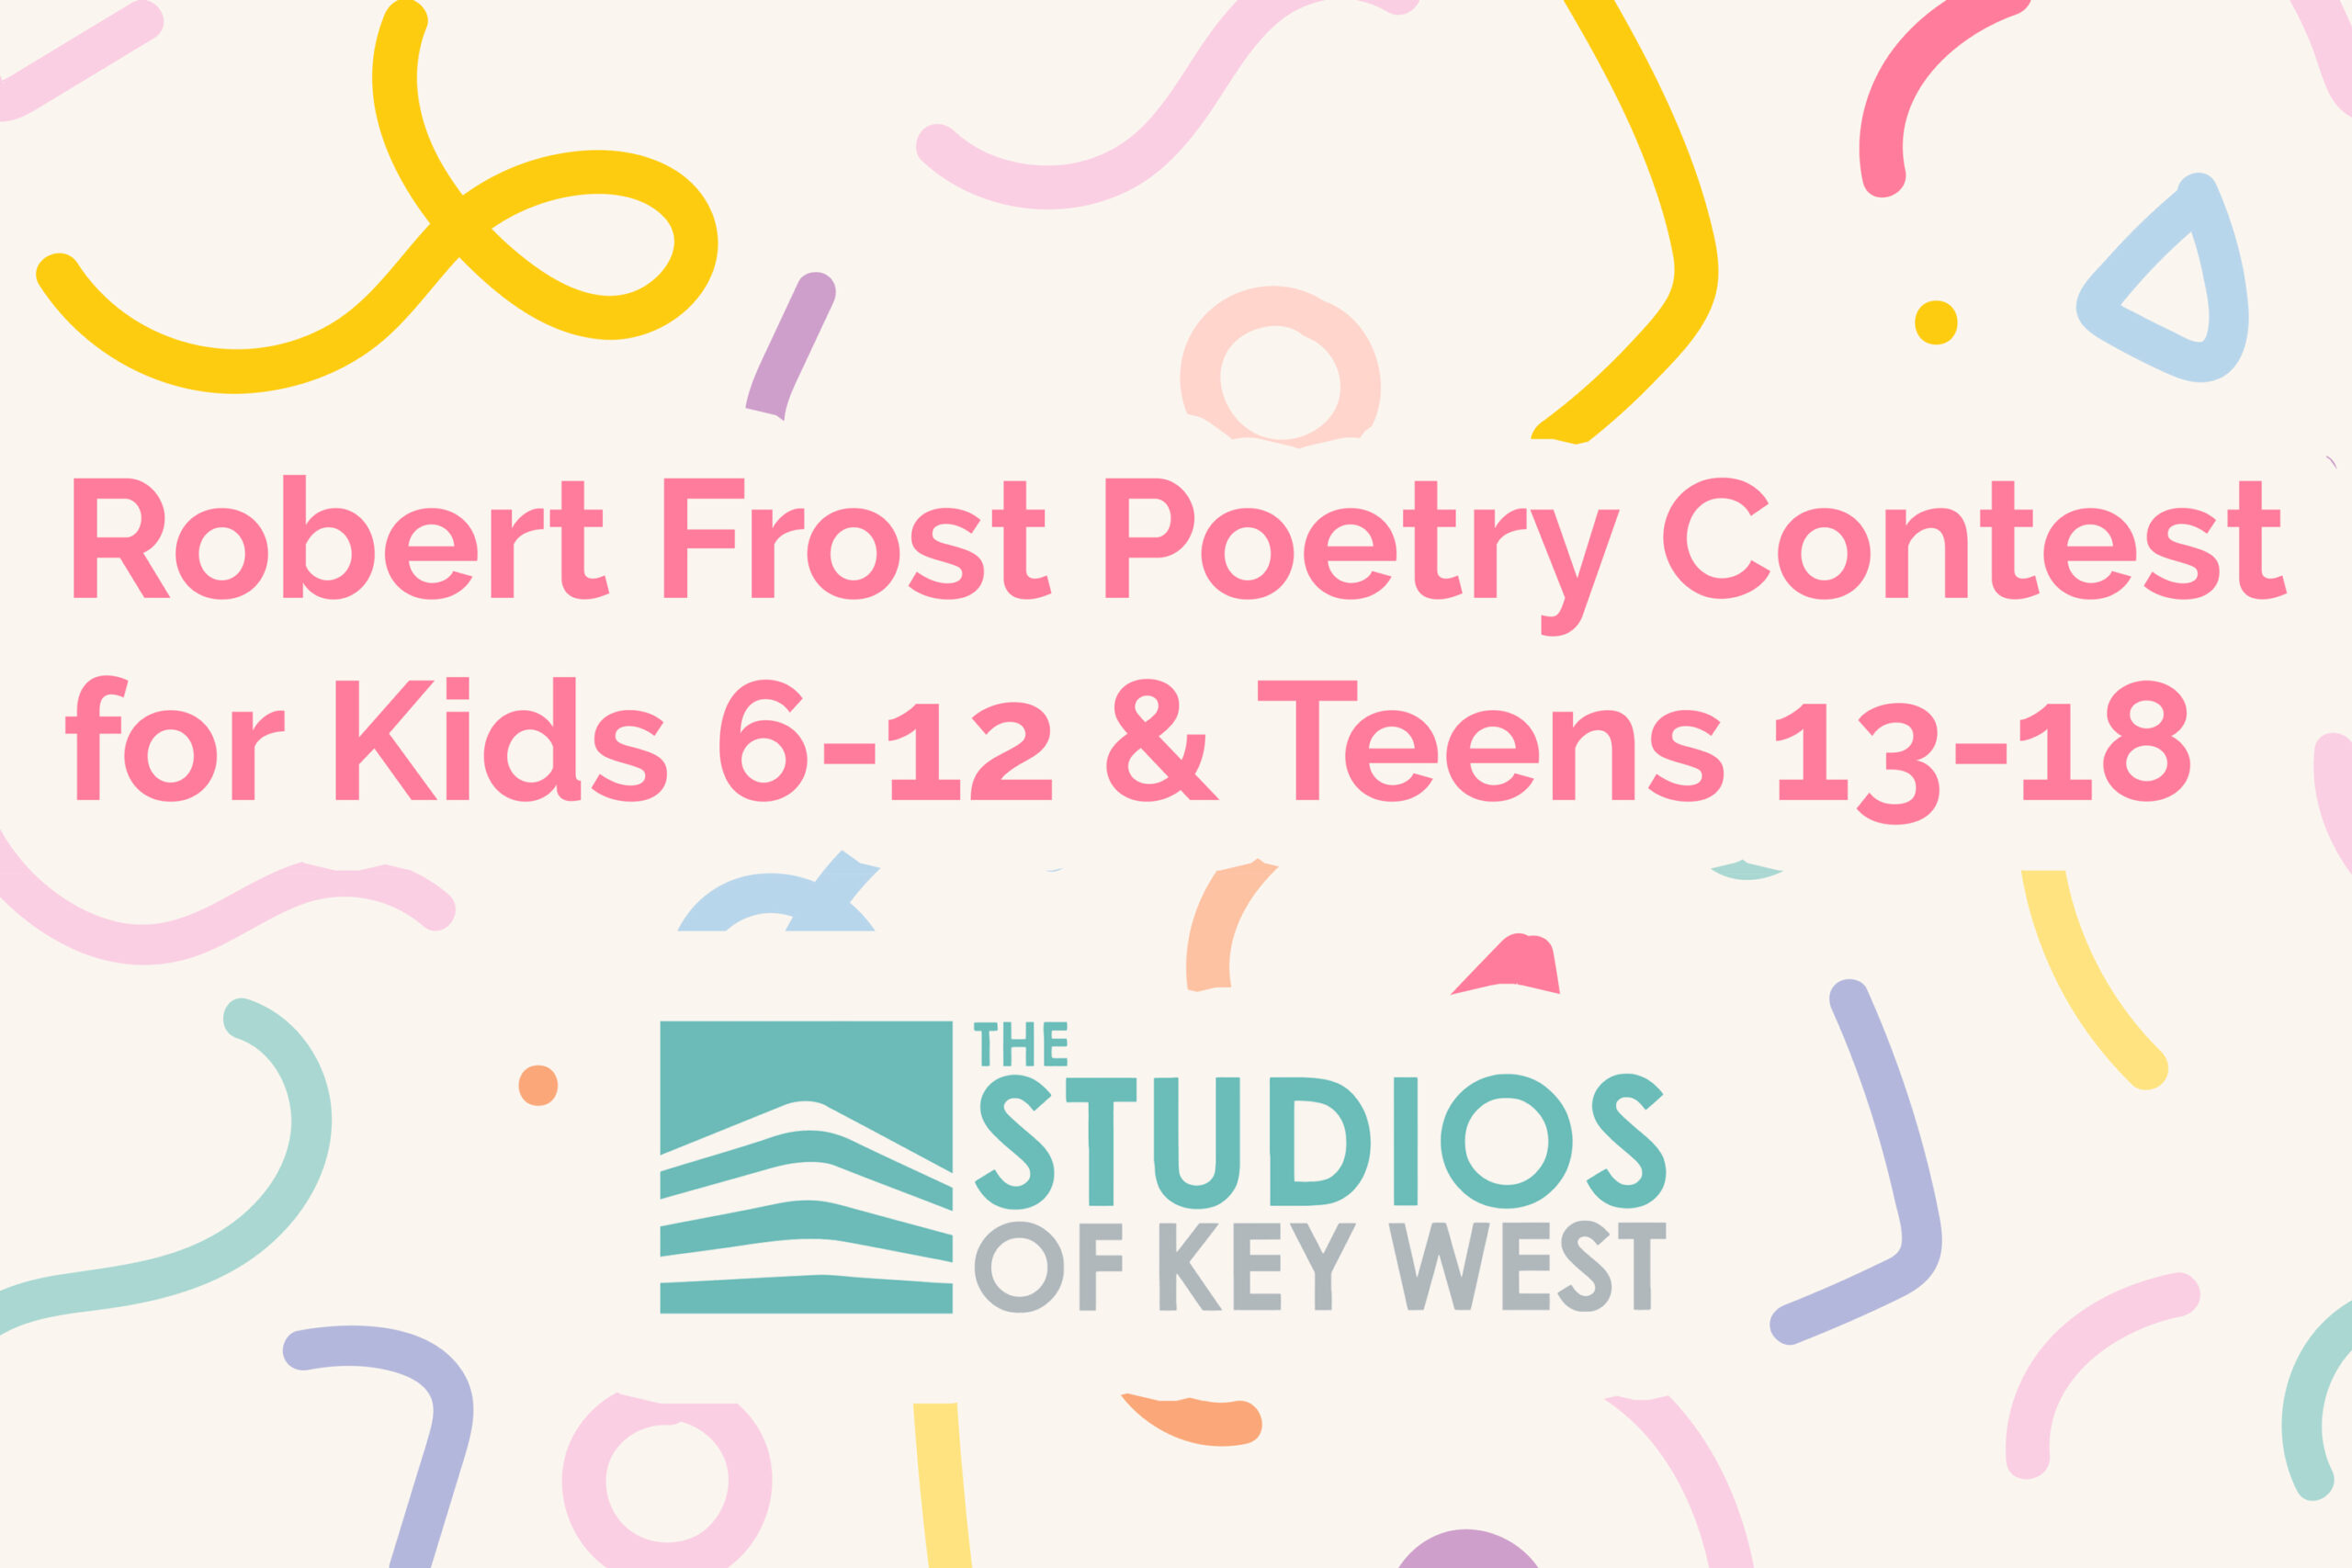 In celebration of National Poetry Month in April, and Robert Frost, The Studios is delighted to host the Annual Kids and Teen Poetry Contest each year.